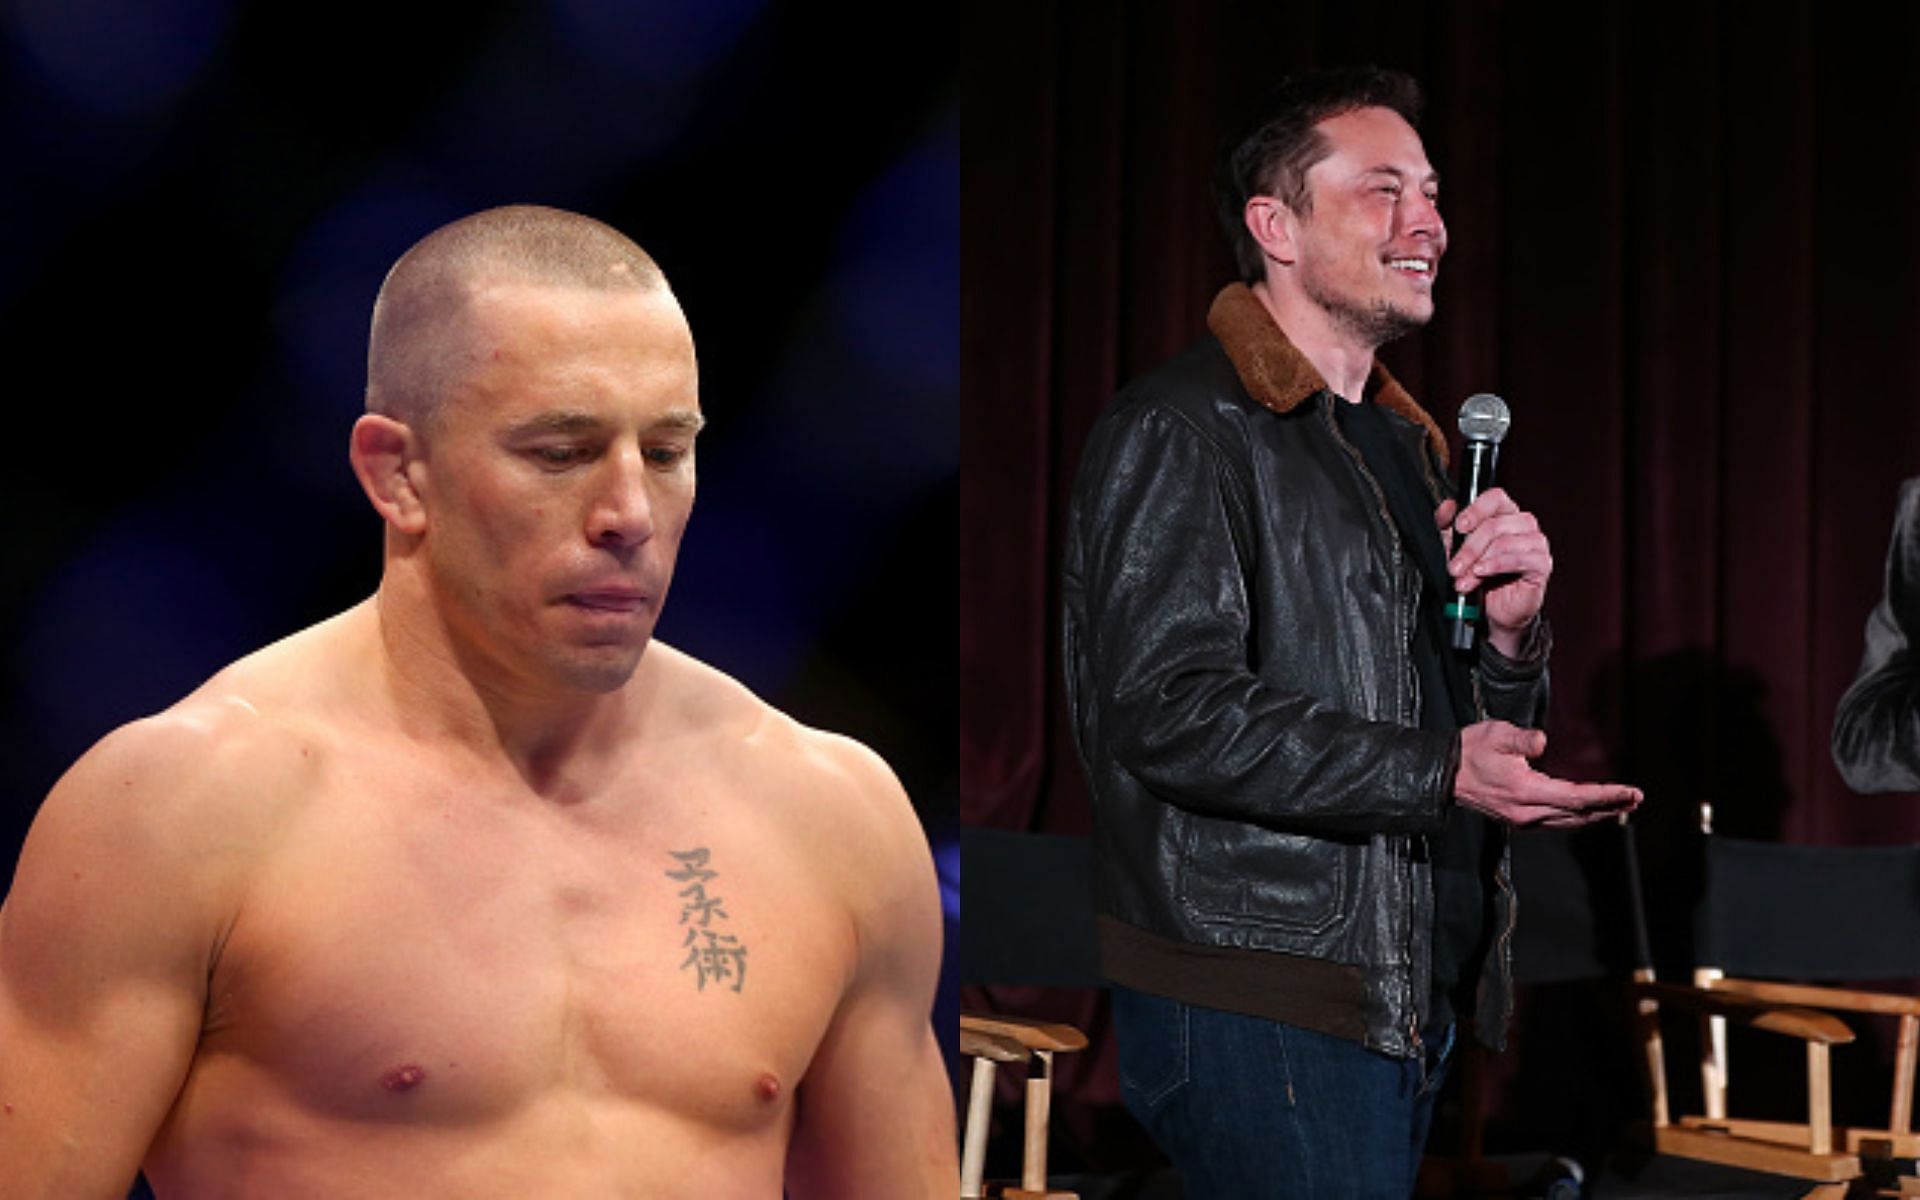 Photo: Elon Musk, Georges St-Pierre pose after apparent MMA training